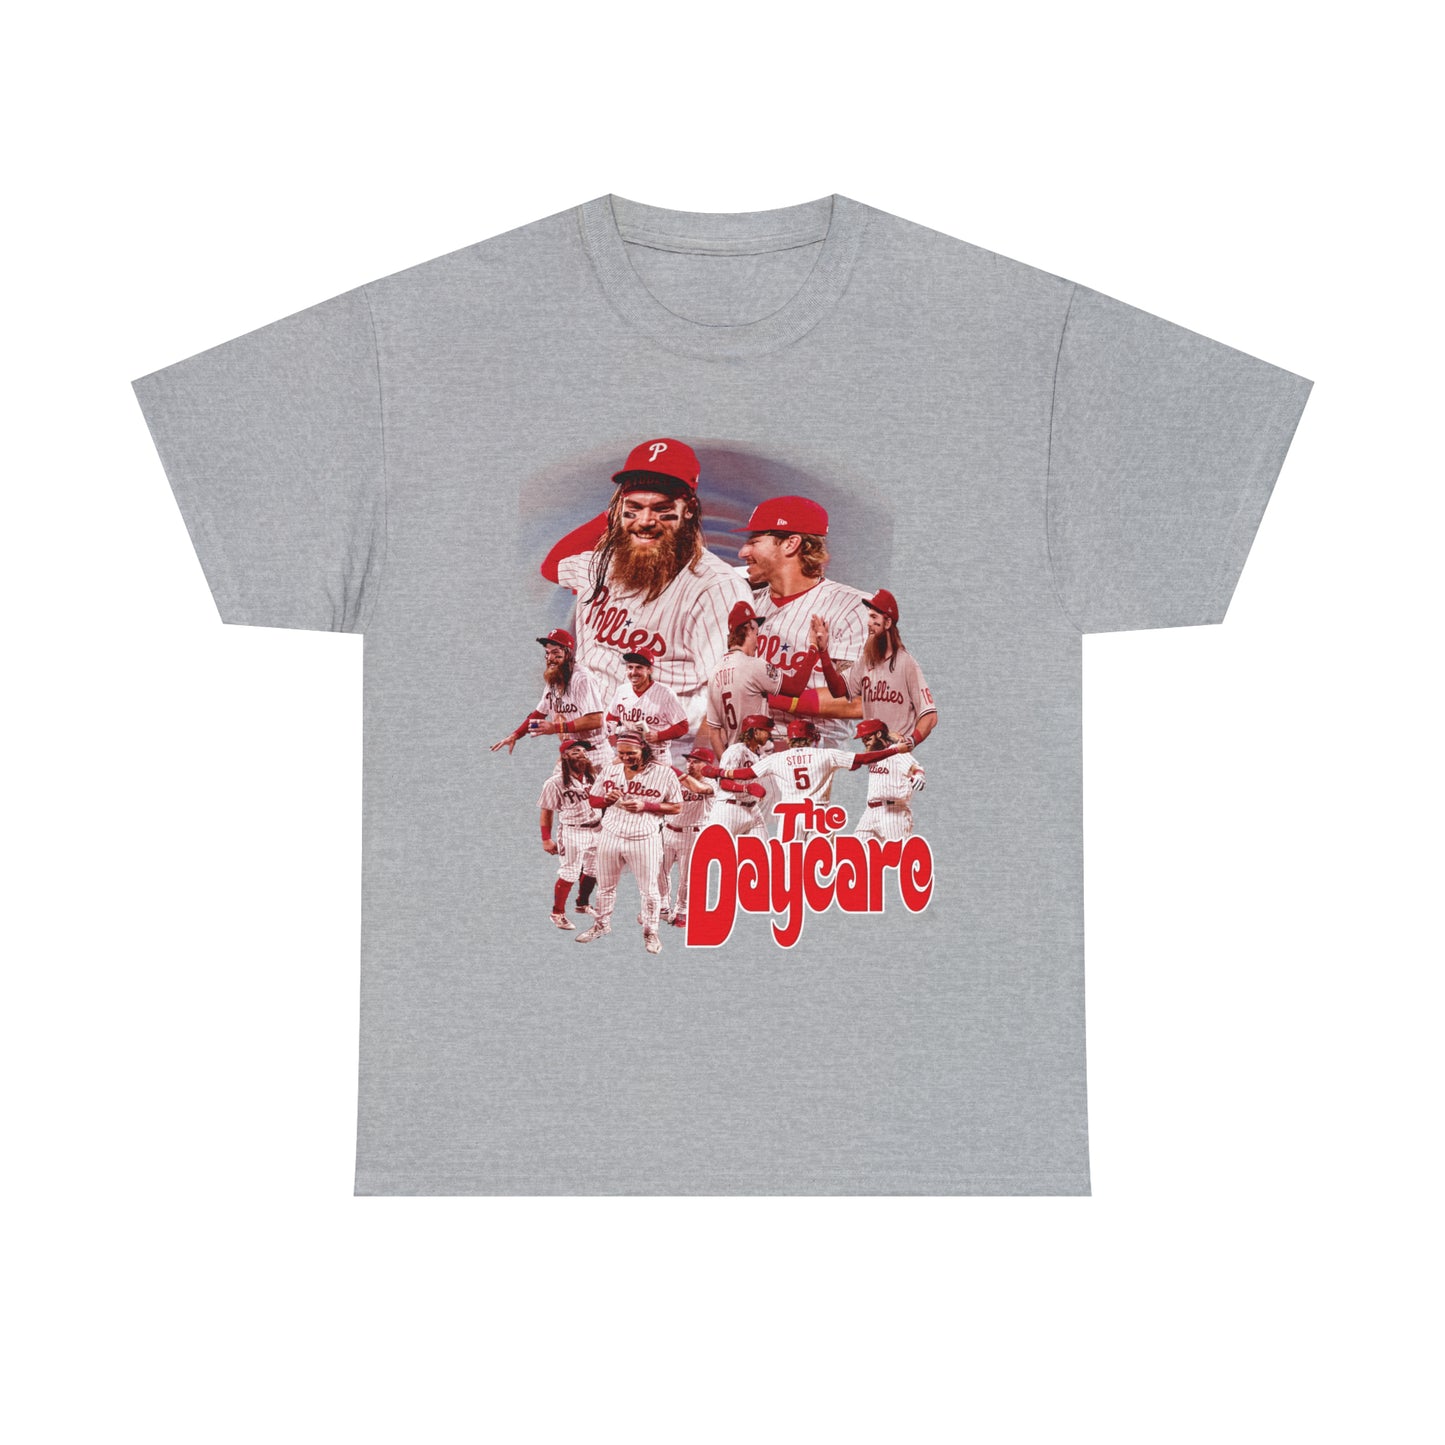 The Daycare Phillies Tee